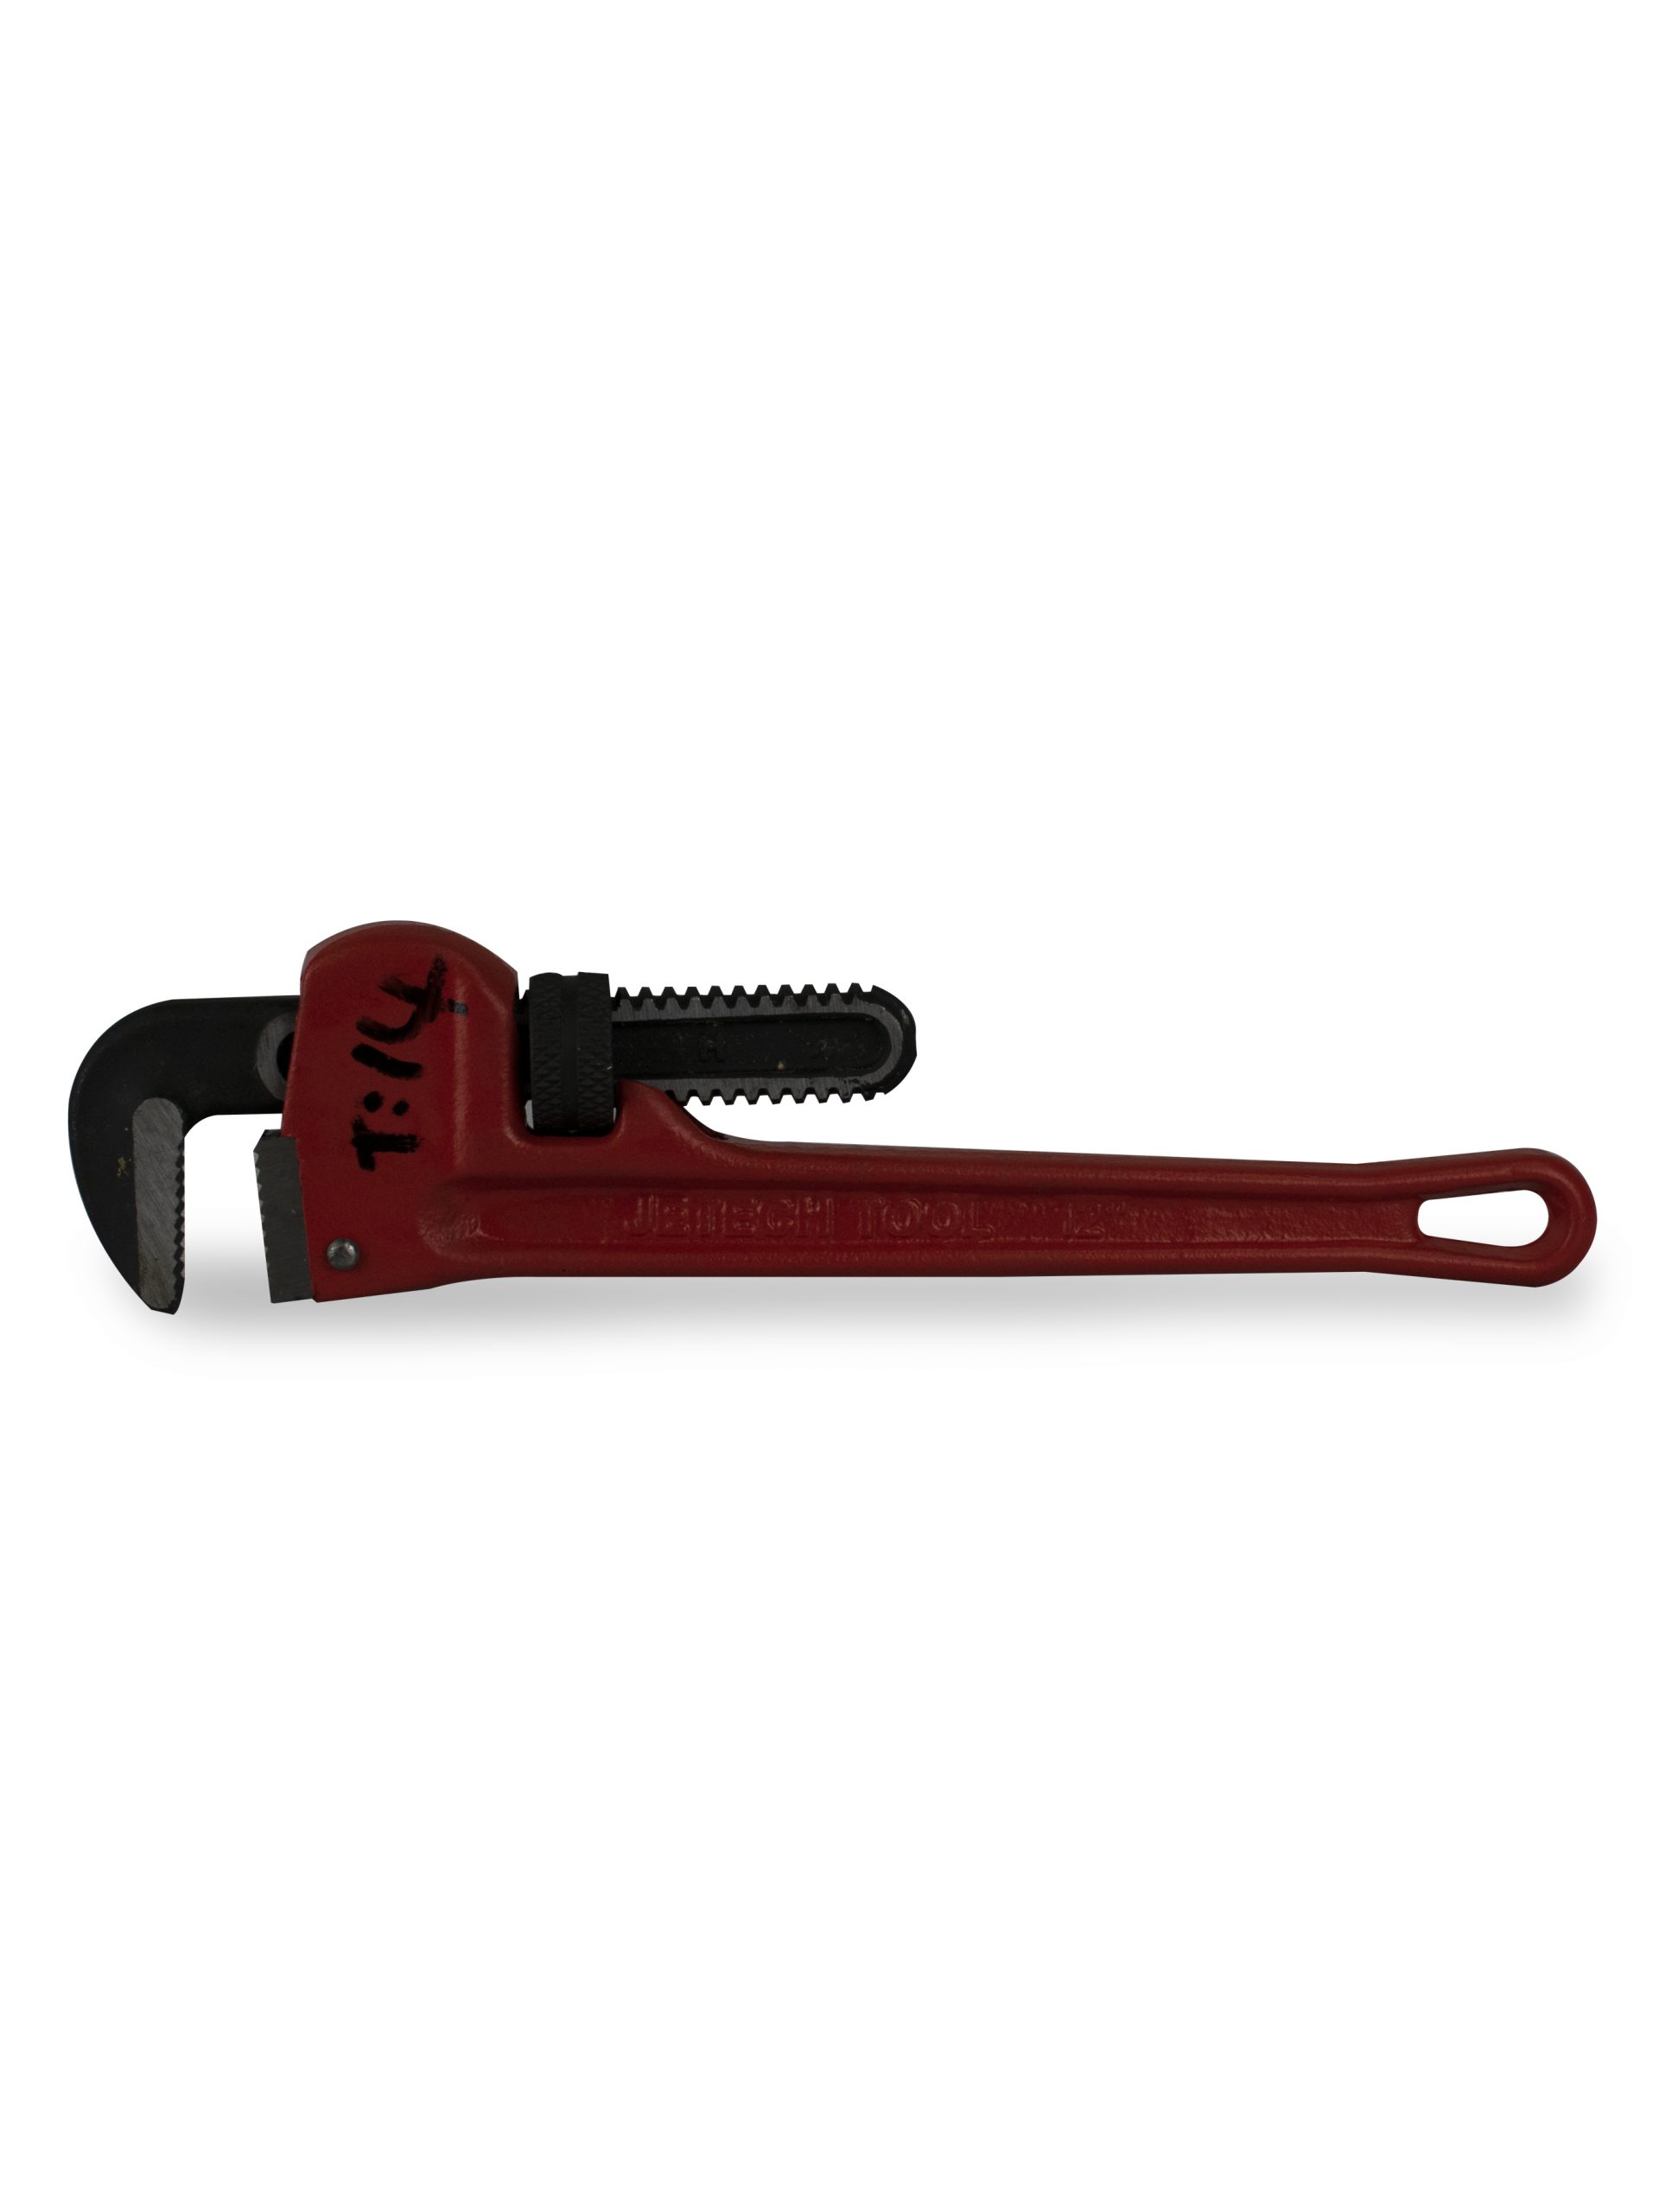 PIPE WRENCH 12 Inches